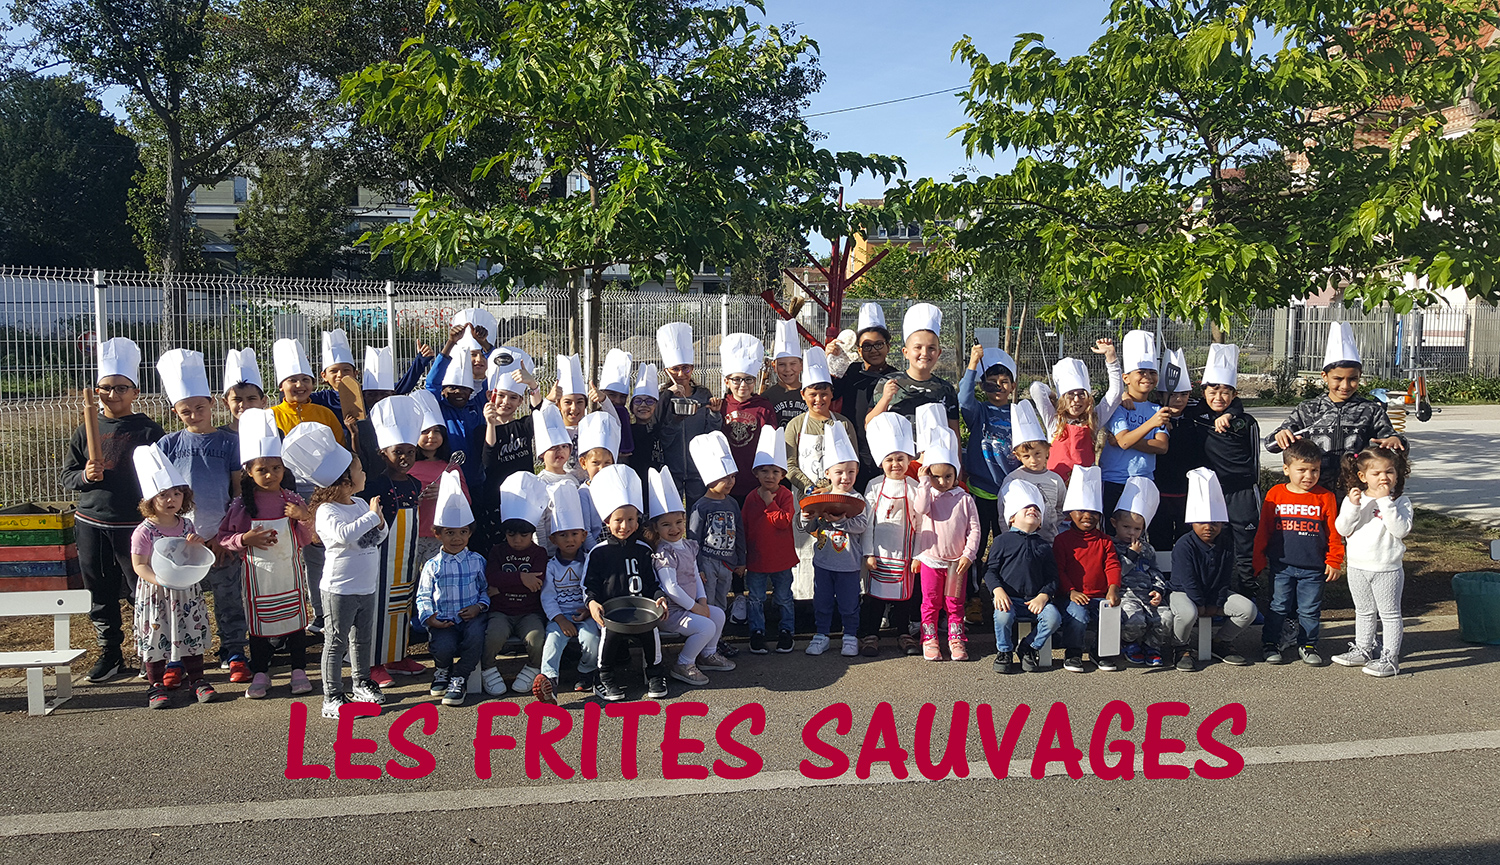 Les Frites Sauvages